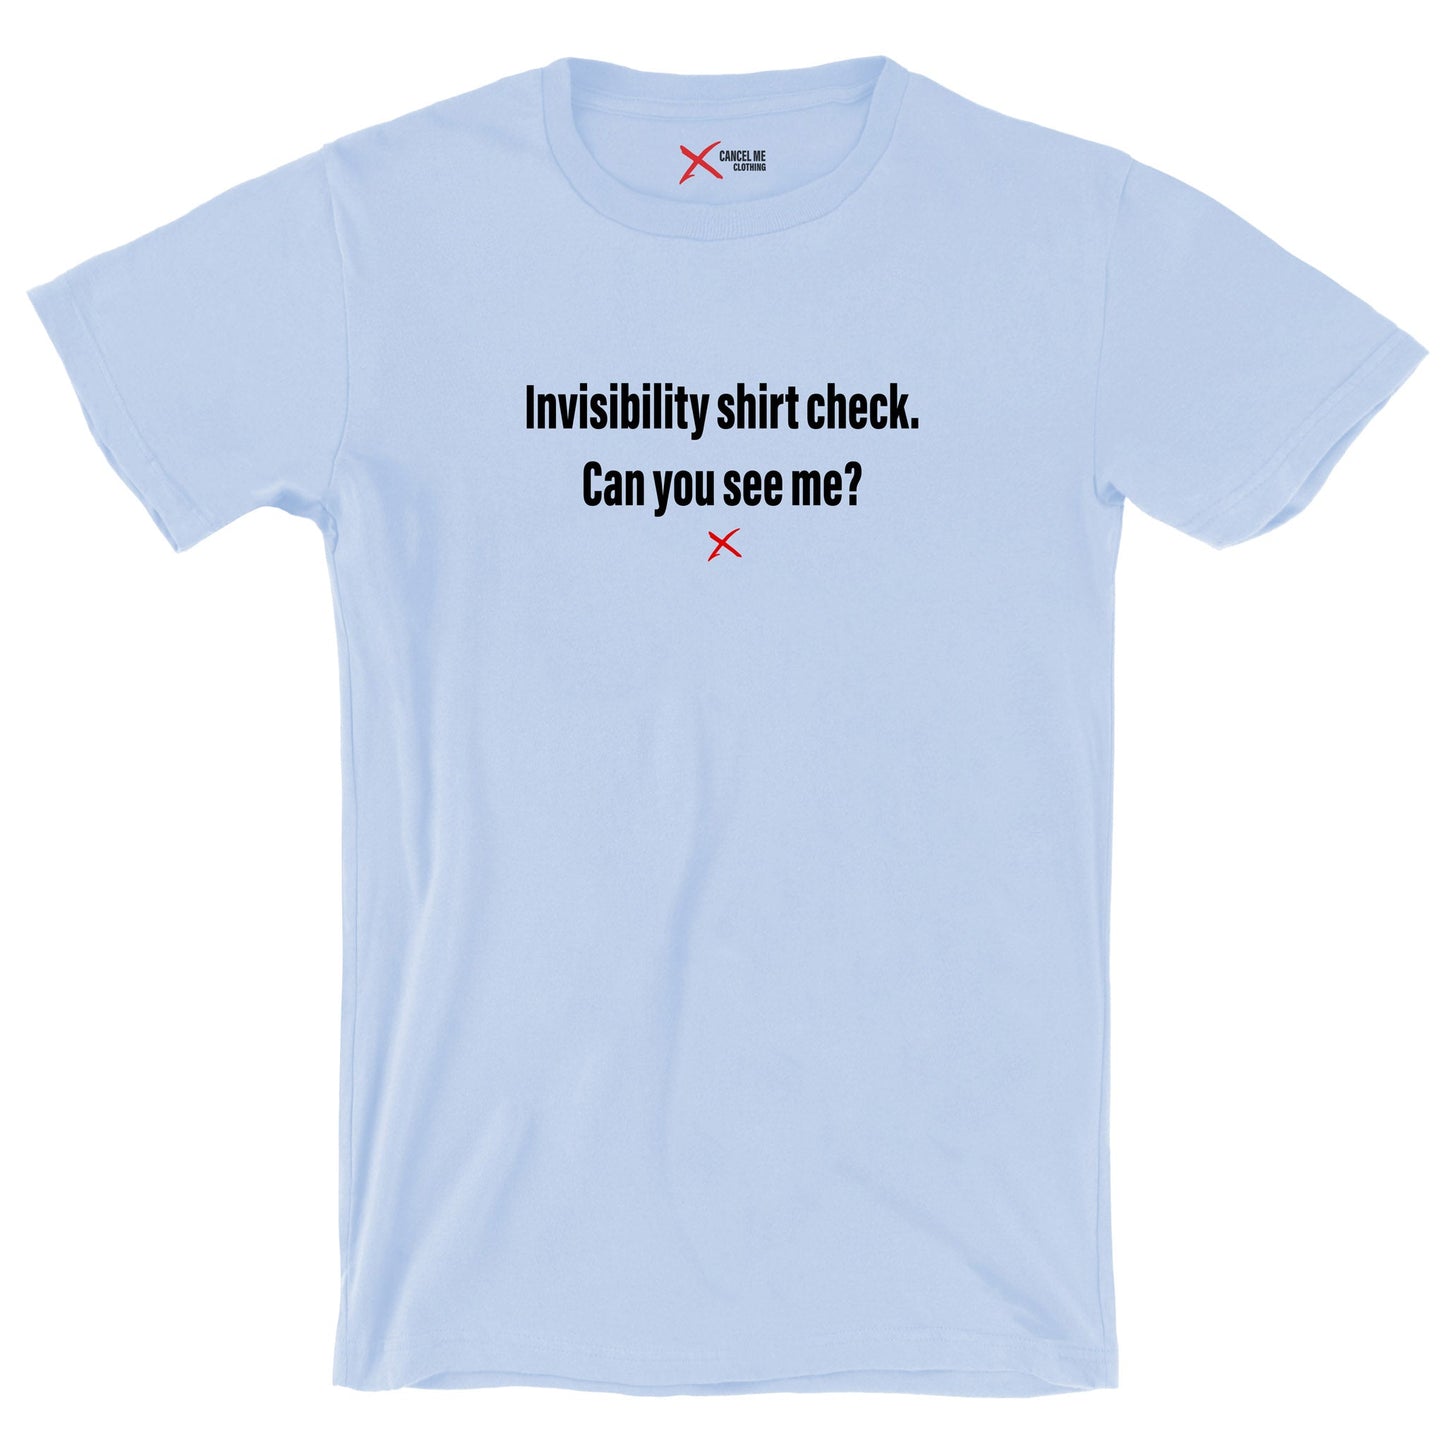 Invisibility shirt check. Can you see me? - Shirt